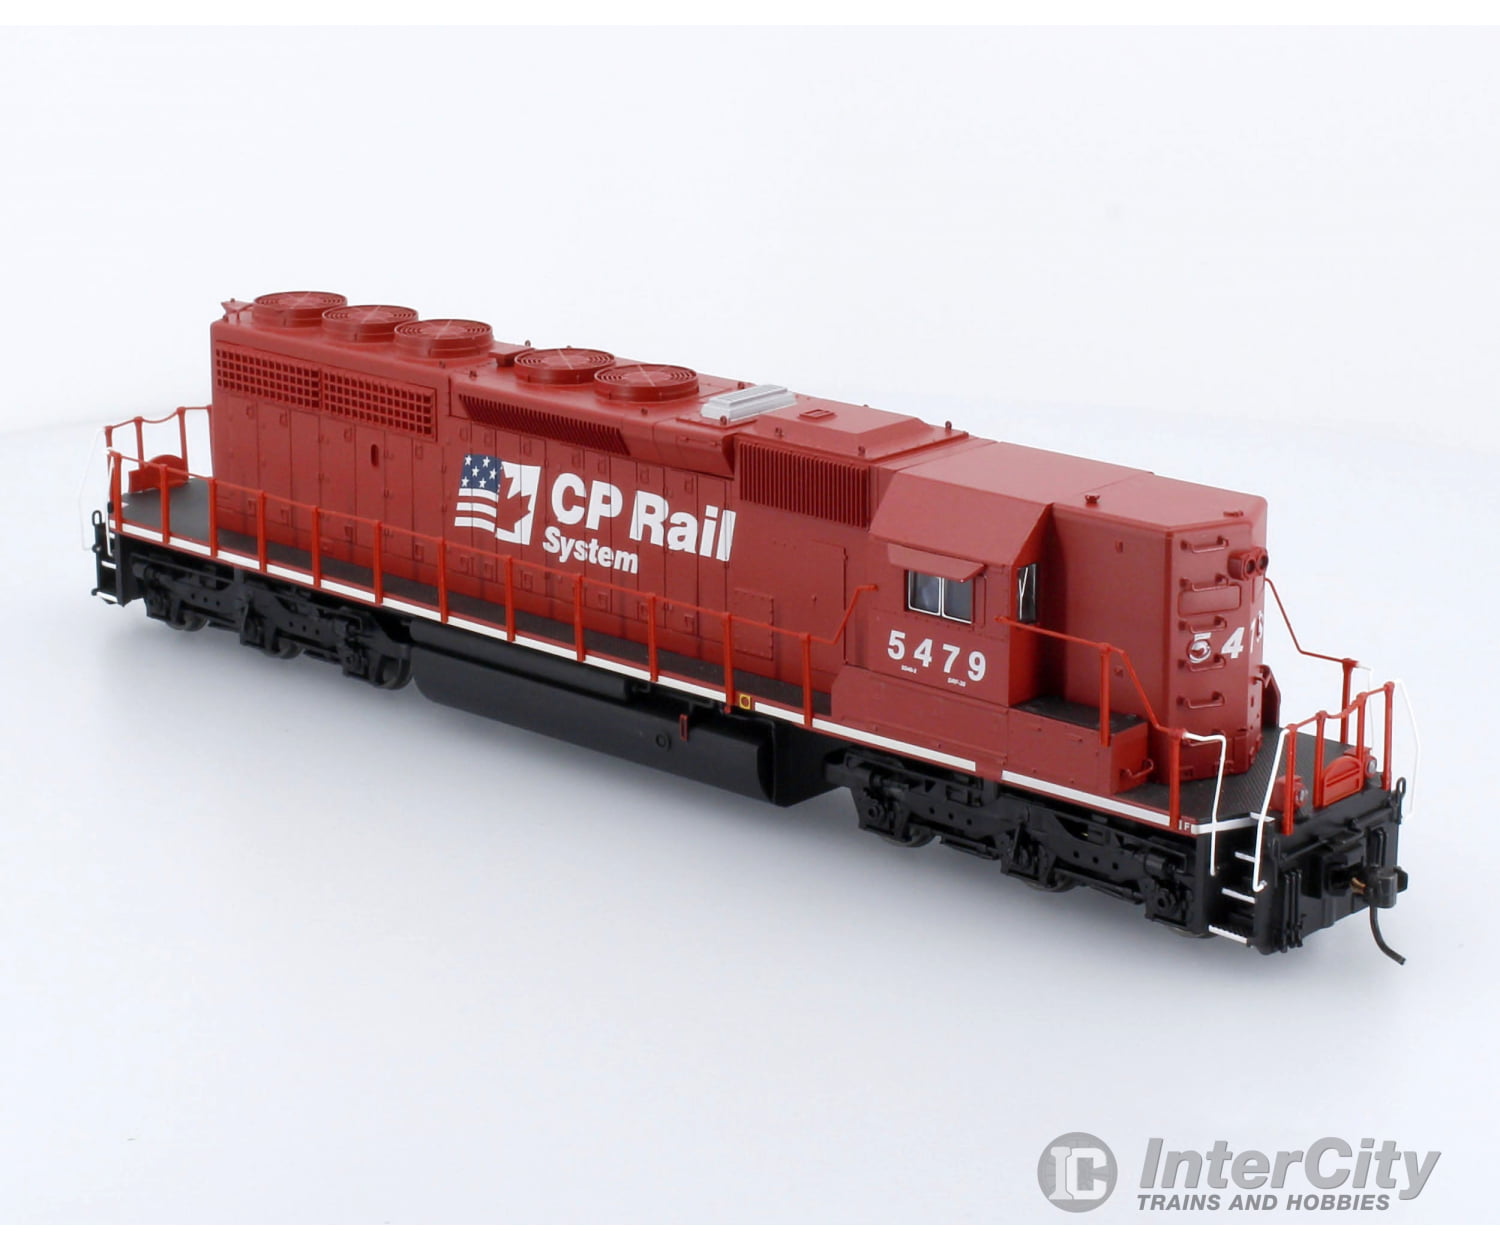 Broadway Limited Ho Scale Canadian Pacific Sd40-2 High-Nose Diesel Locomotive #5479 With Paragon3